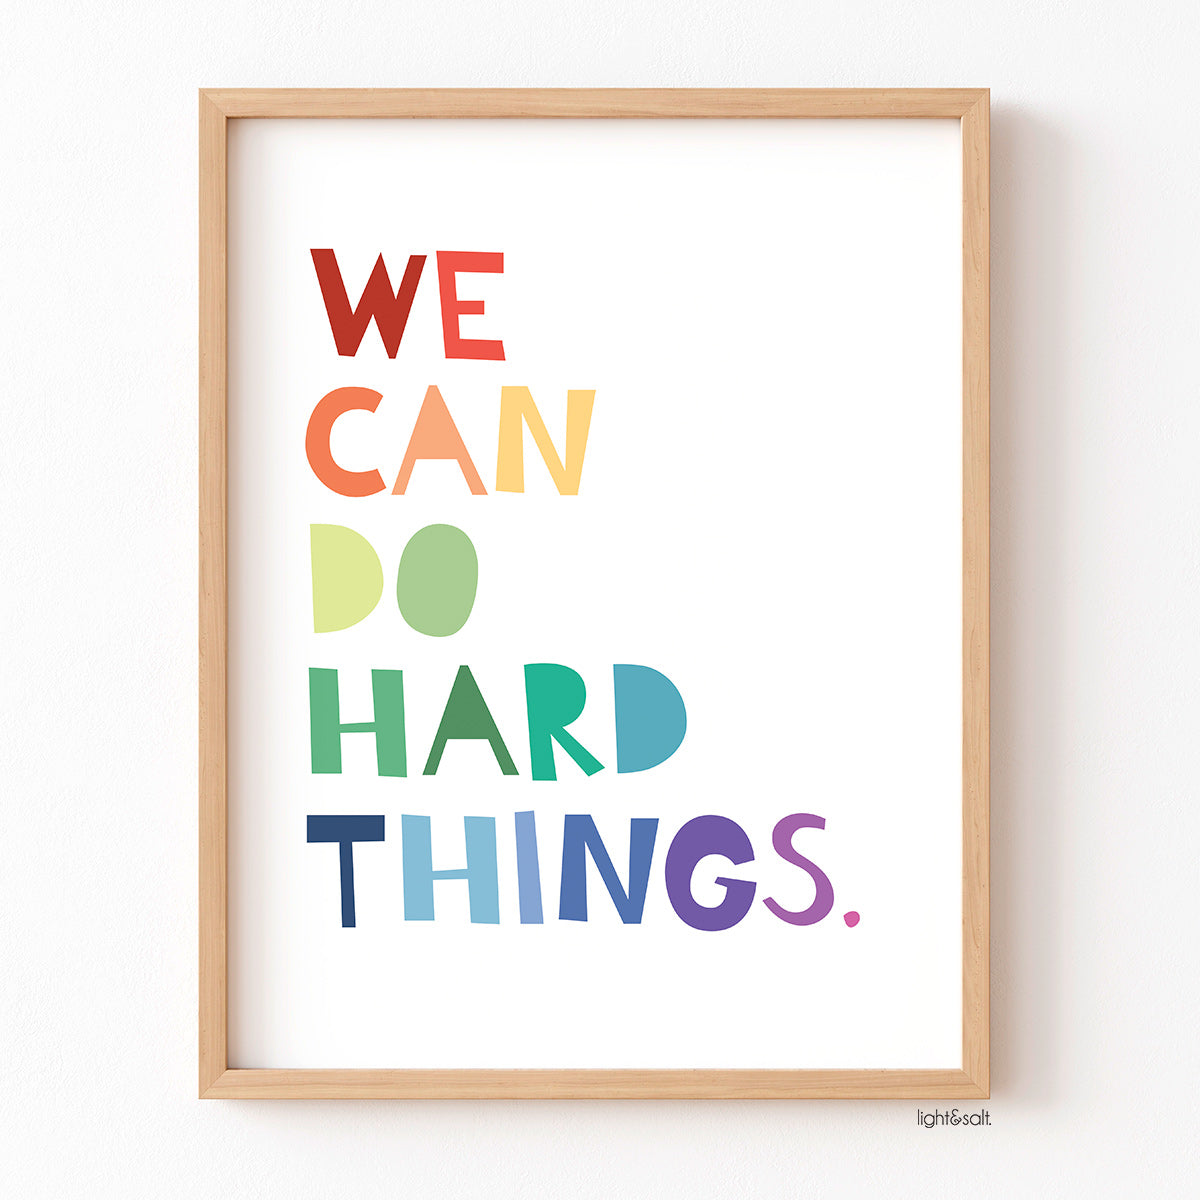 We can do hard things poster